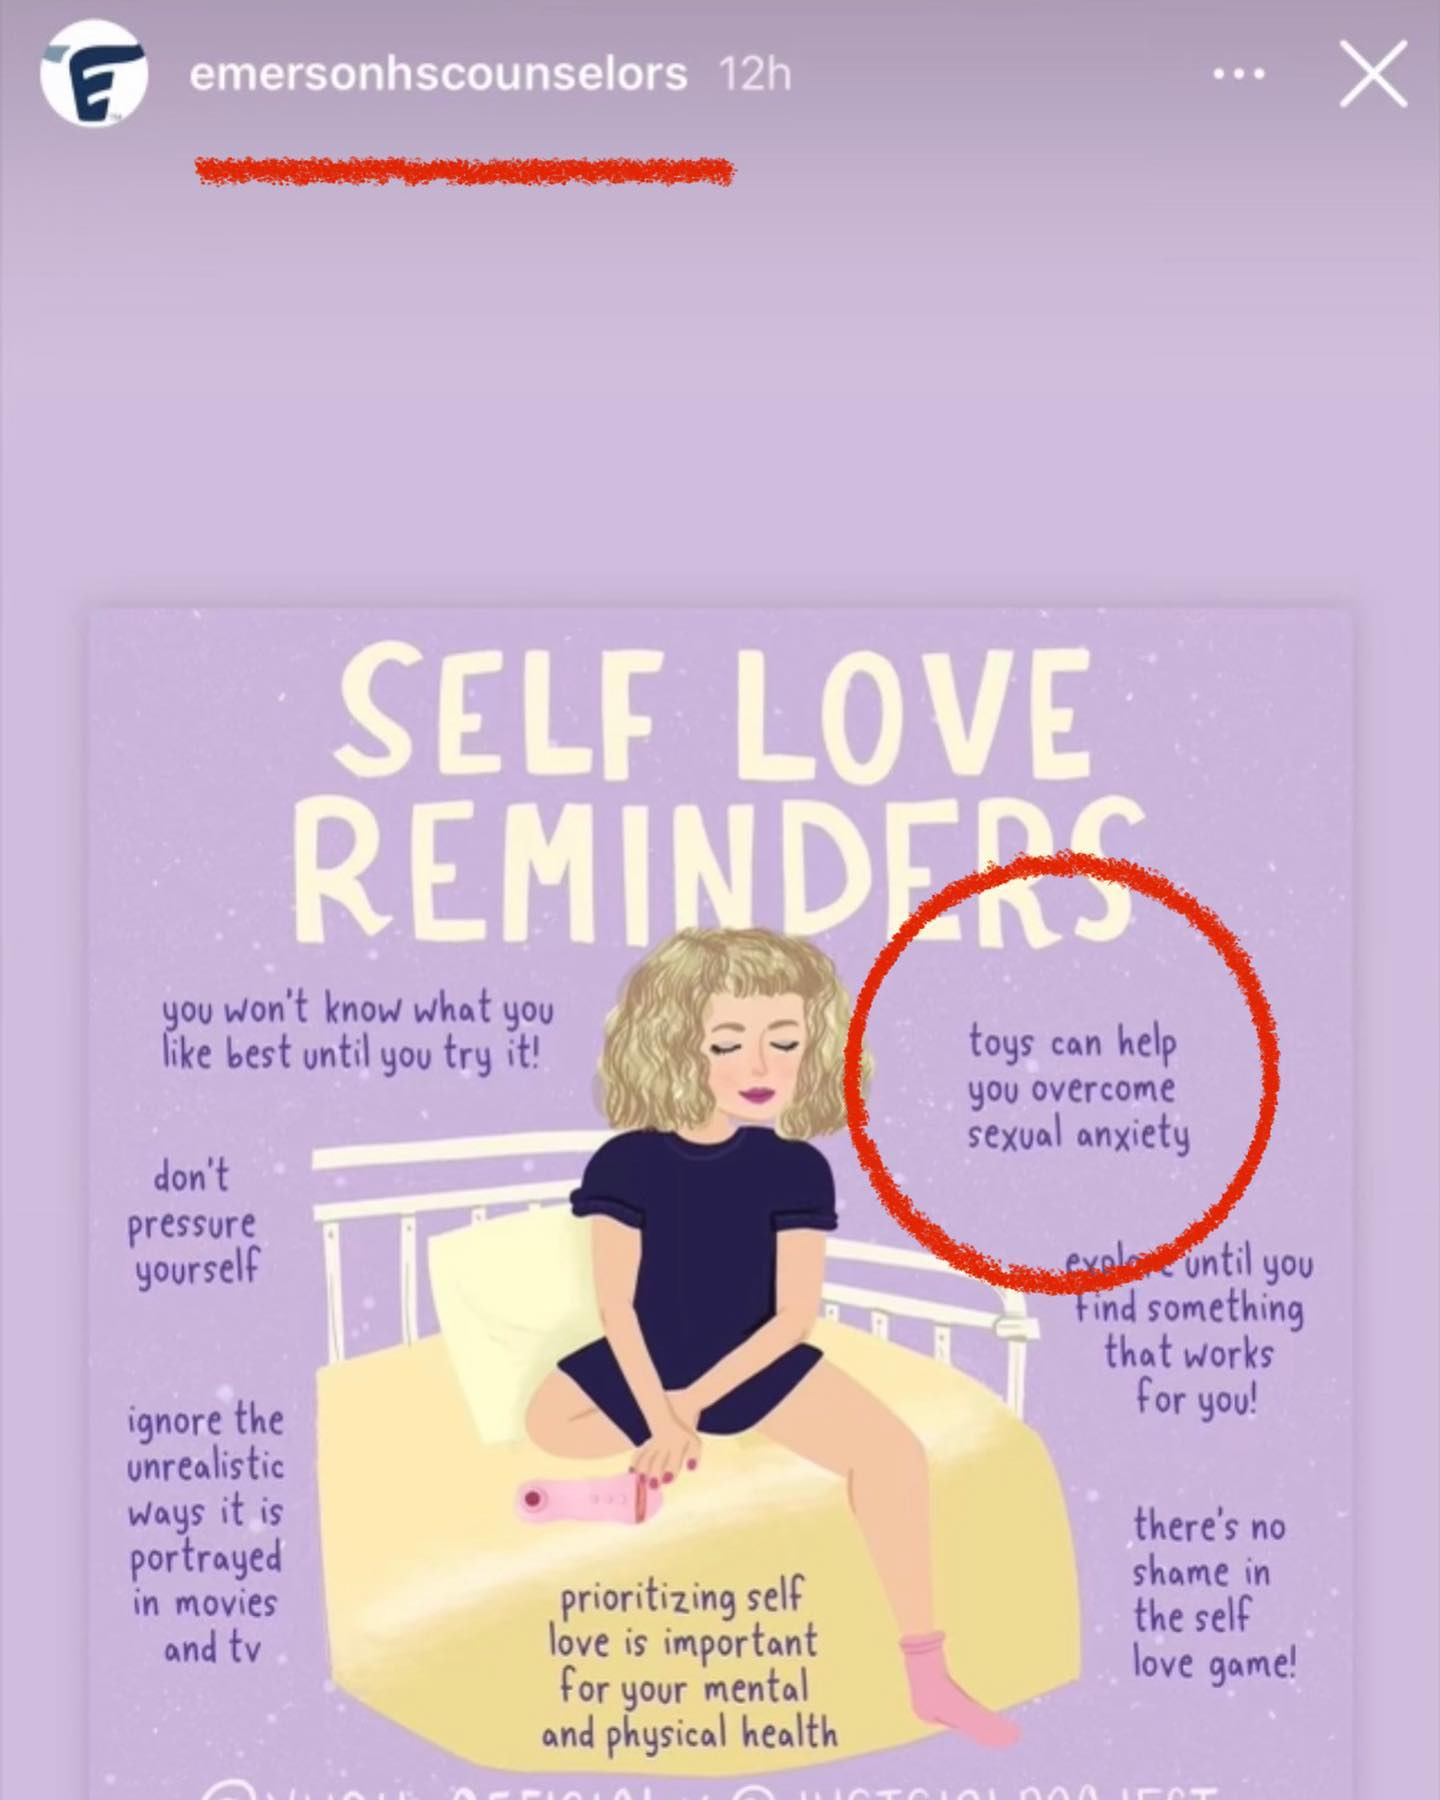 May be an illustration of 1 person, book and text that says 'E emersonhscounselors 12h SELF LOVE REMINDER you won't know what you like best until you try it! don't pressure yourself toys can help you overcome sexual anxiety until you Find something that works for you! ignore the unrealistic ways it is portrayed in movies and tv prioritizing self love important for your mental and physical health there's no shame in the self love AaTe!'